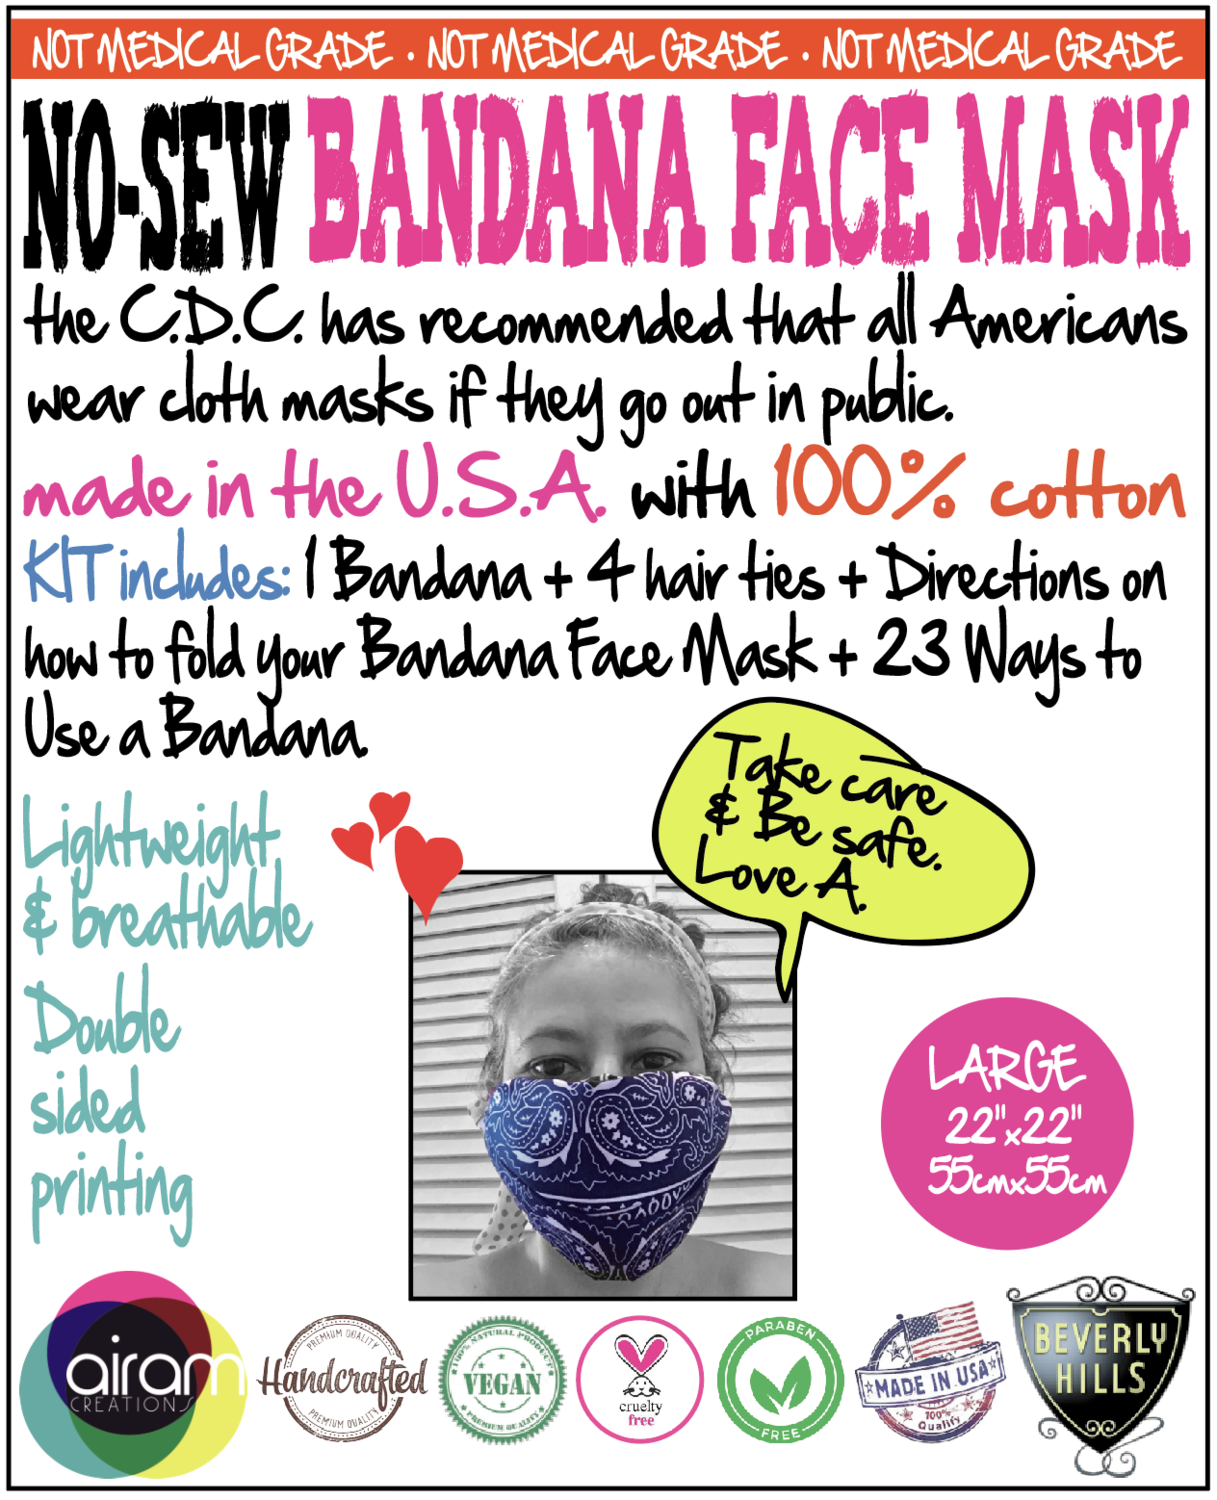 👸🏽🤴🏽 Bandana Face Mask Kit 100% Cotton with 4 hair ties, 1 pair nylon of stocking to boost protection, Directions on how to fold. Custom Personalized Gift